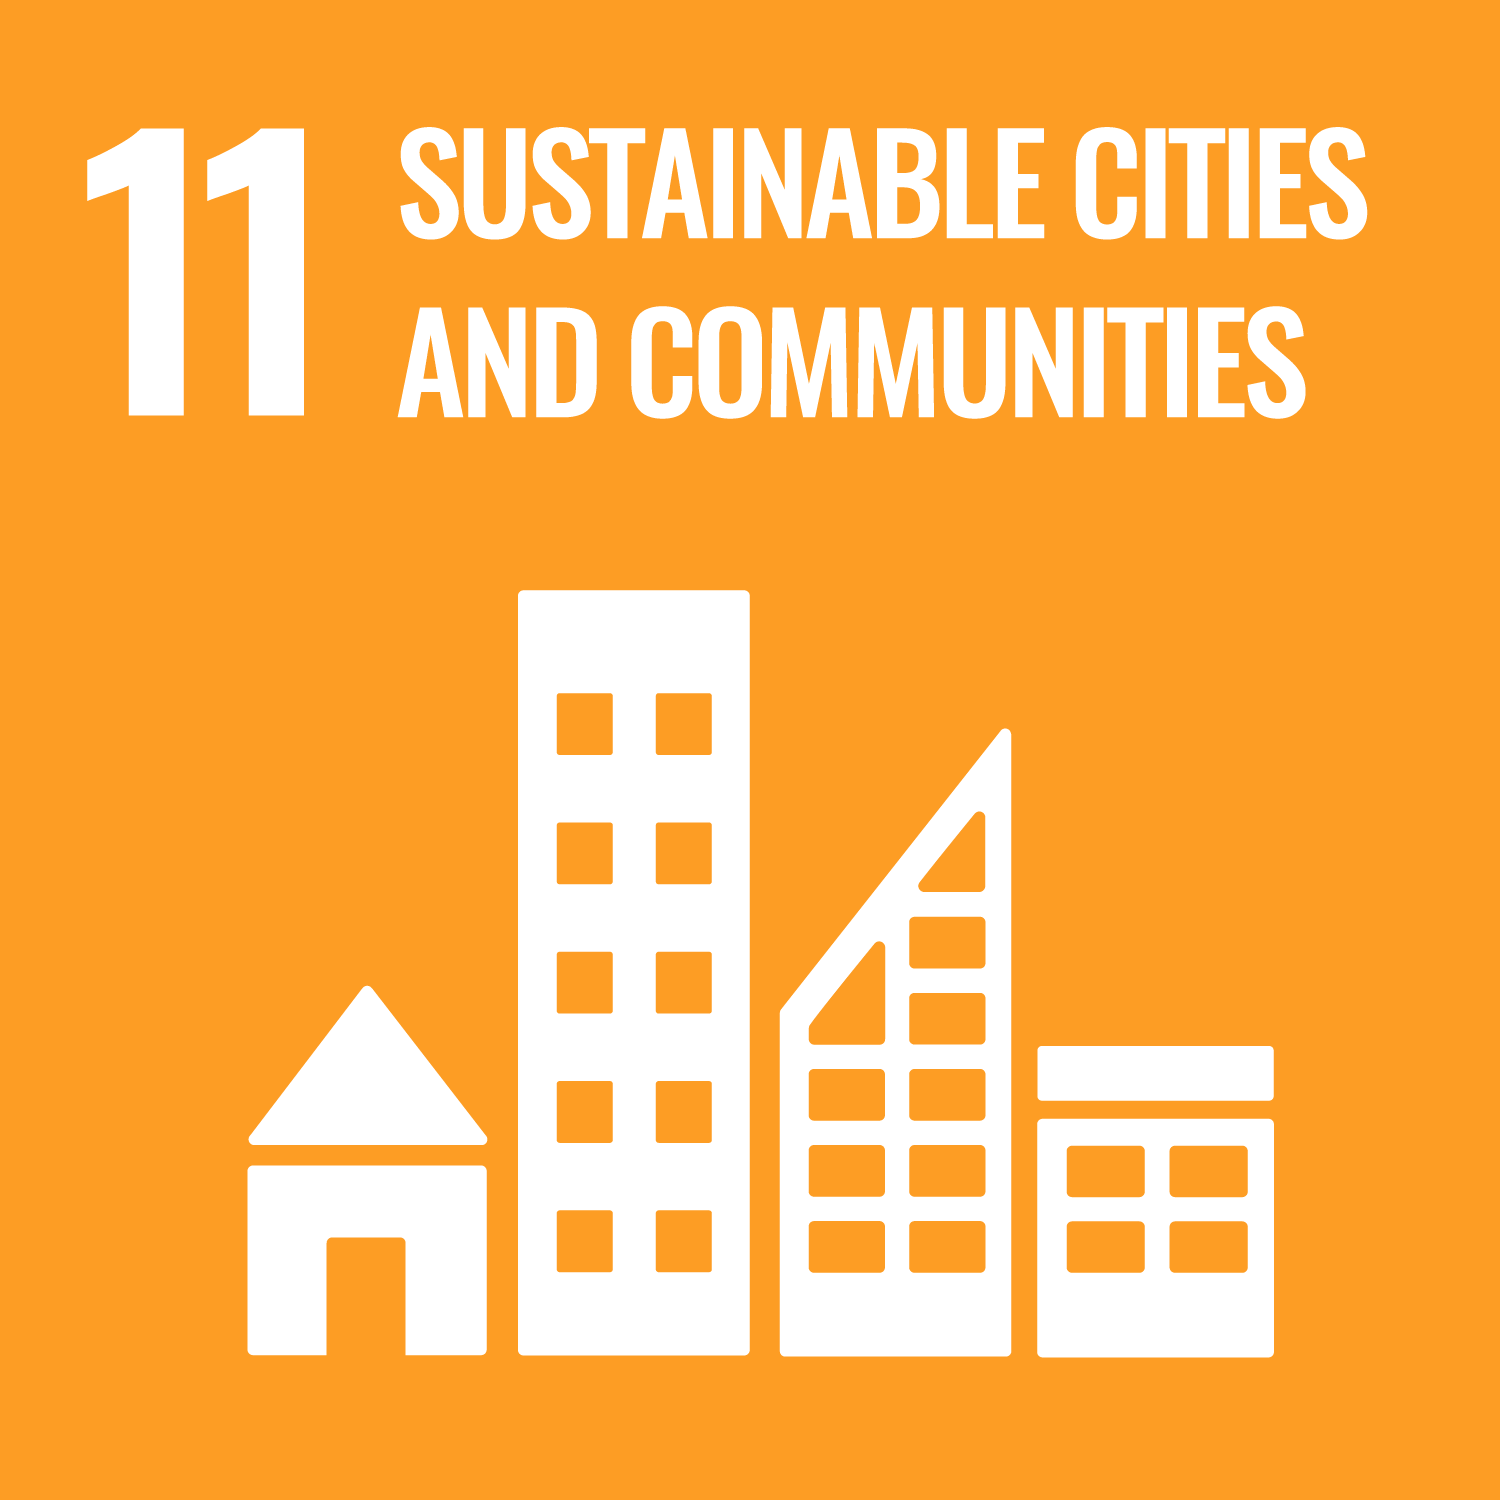 Sustainable cities and communities (SDG-11)